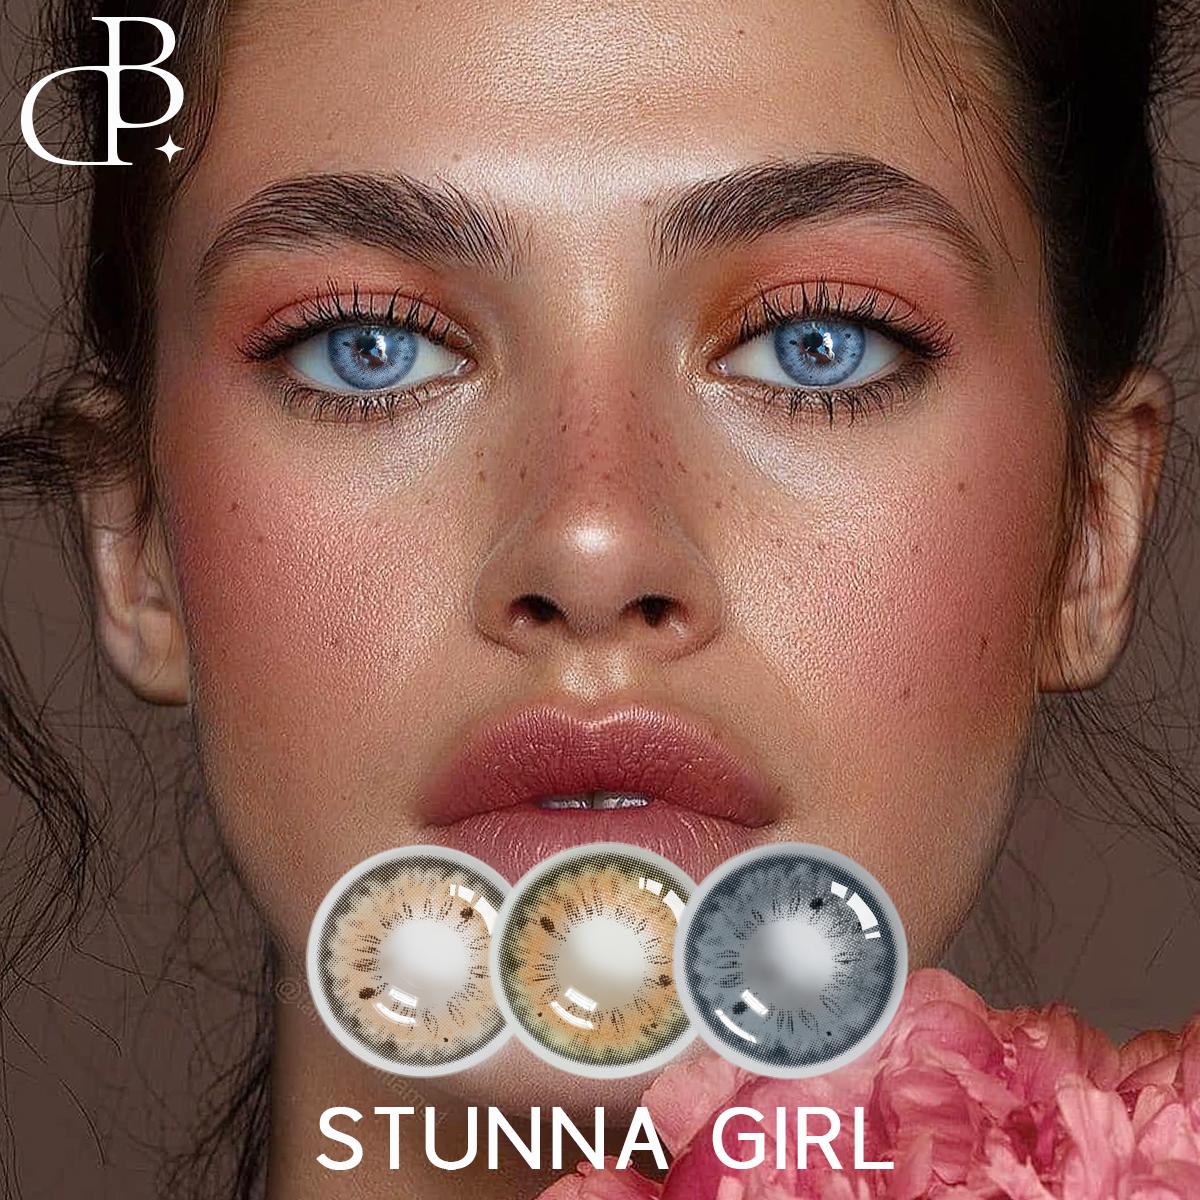 STUNNA GIRL New Private Label Dbeyes Eye Contact Wholesale Lentilles Contact Couleur Color Cosmetic Contact Lens